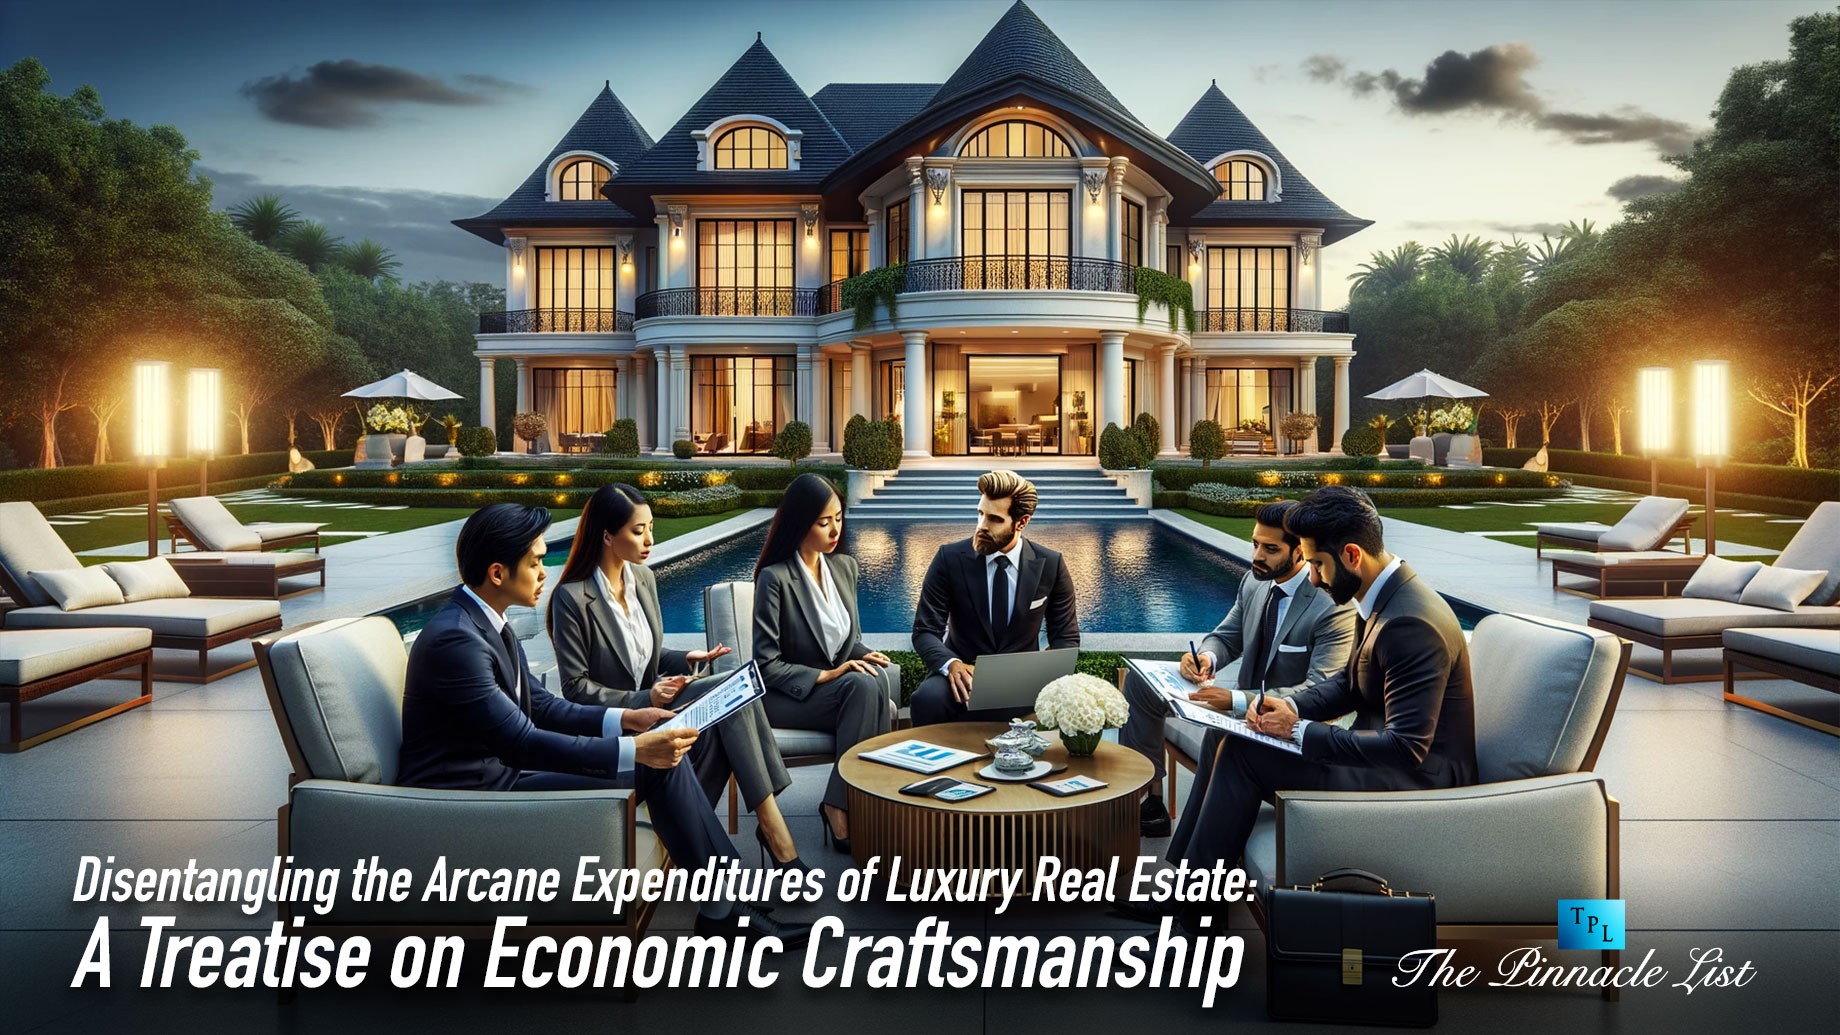 Disentangling the Arcane Expenditures of Luxury Real Estate: A Treatise on Economic Craftsmanship